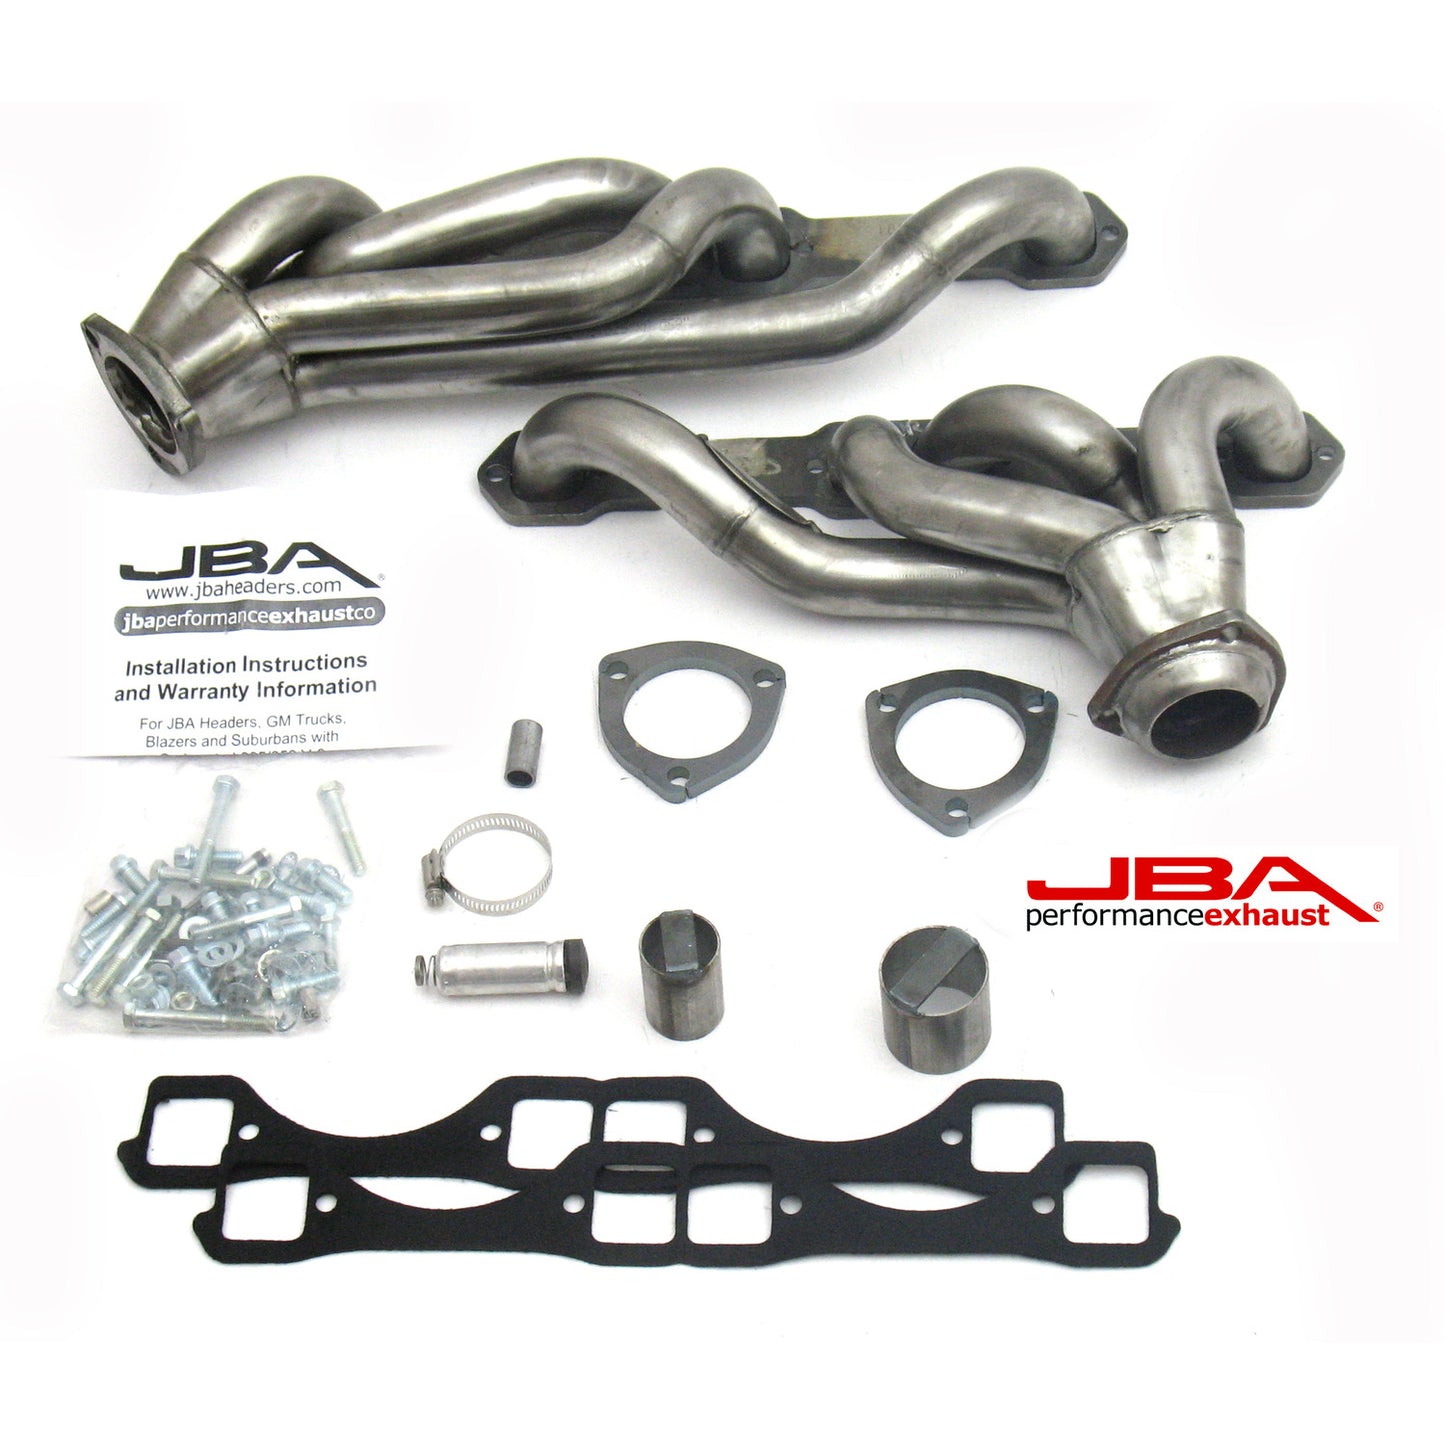 JBA Performance Exhaust 1830S-6 1 5/8" Header Shorty Stainless Steel GM Truck 5.0/5.7L with Carburetor